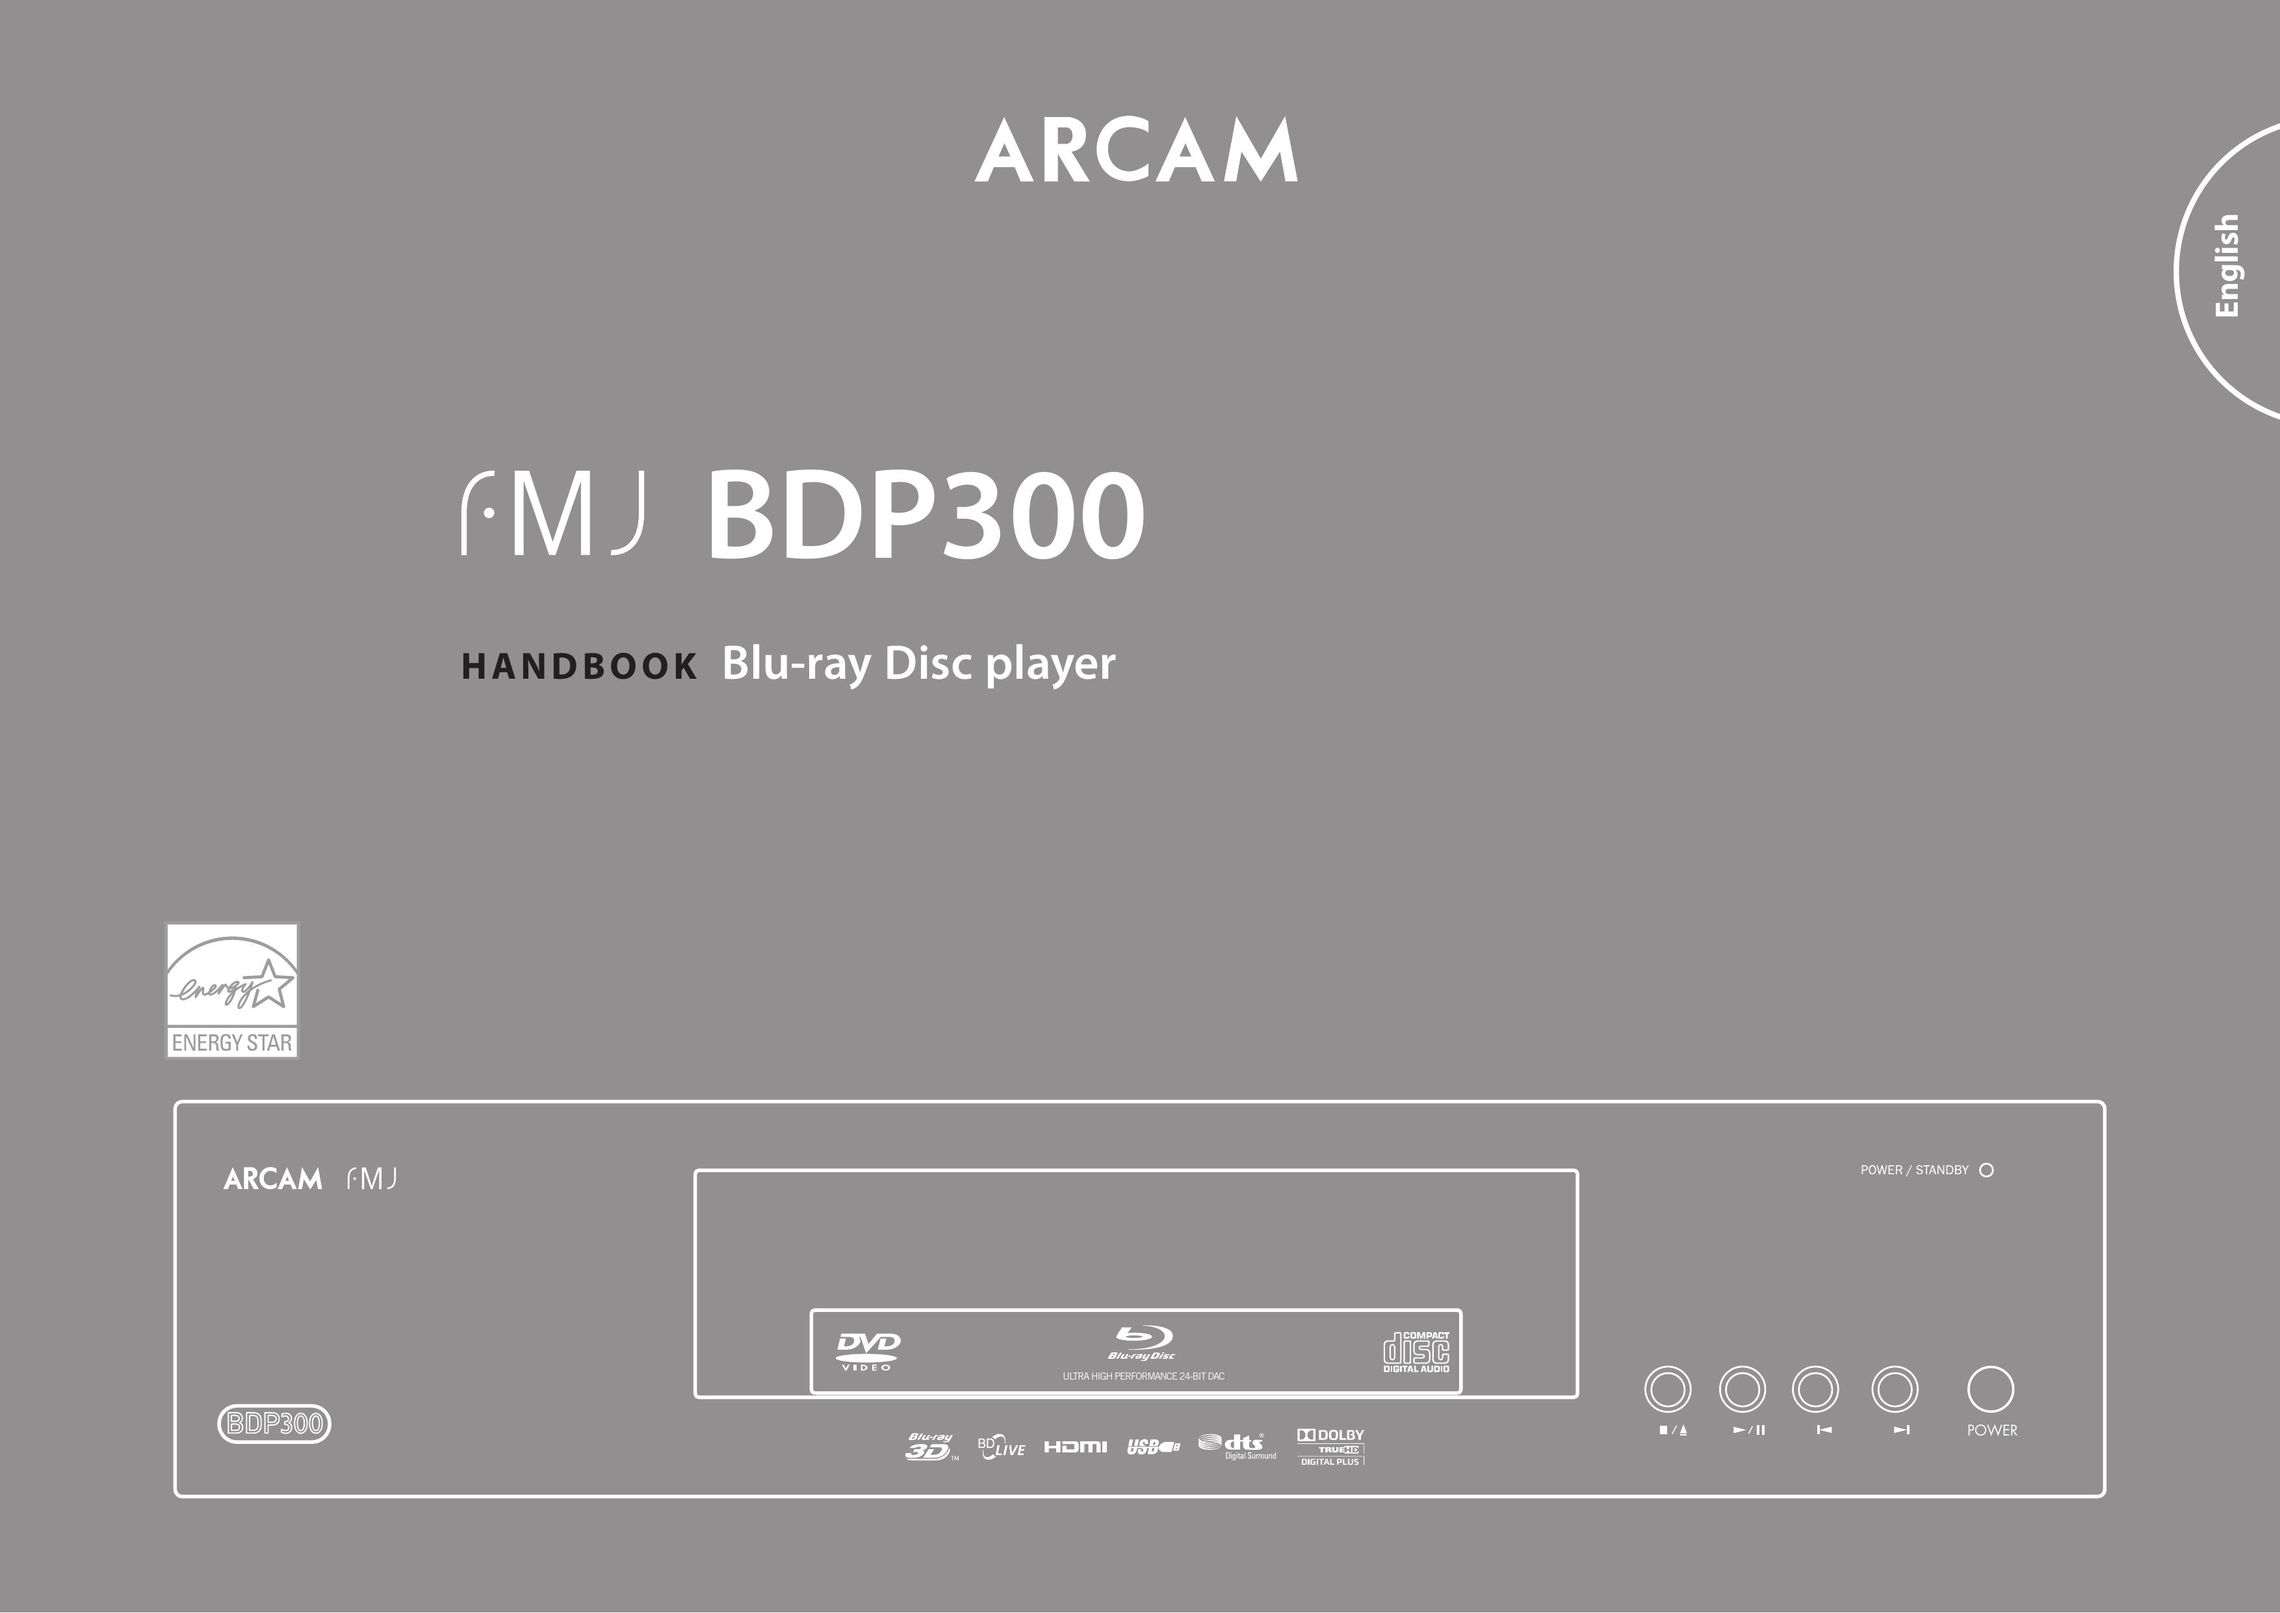 Arcam BDP300 Blu-ray Player User Manual (Page 1)